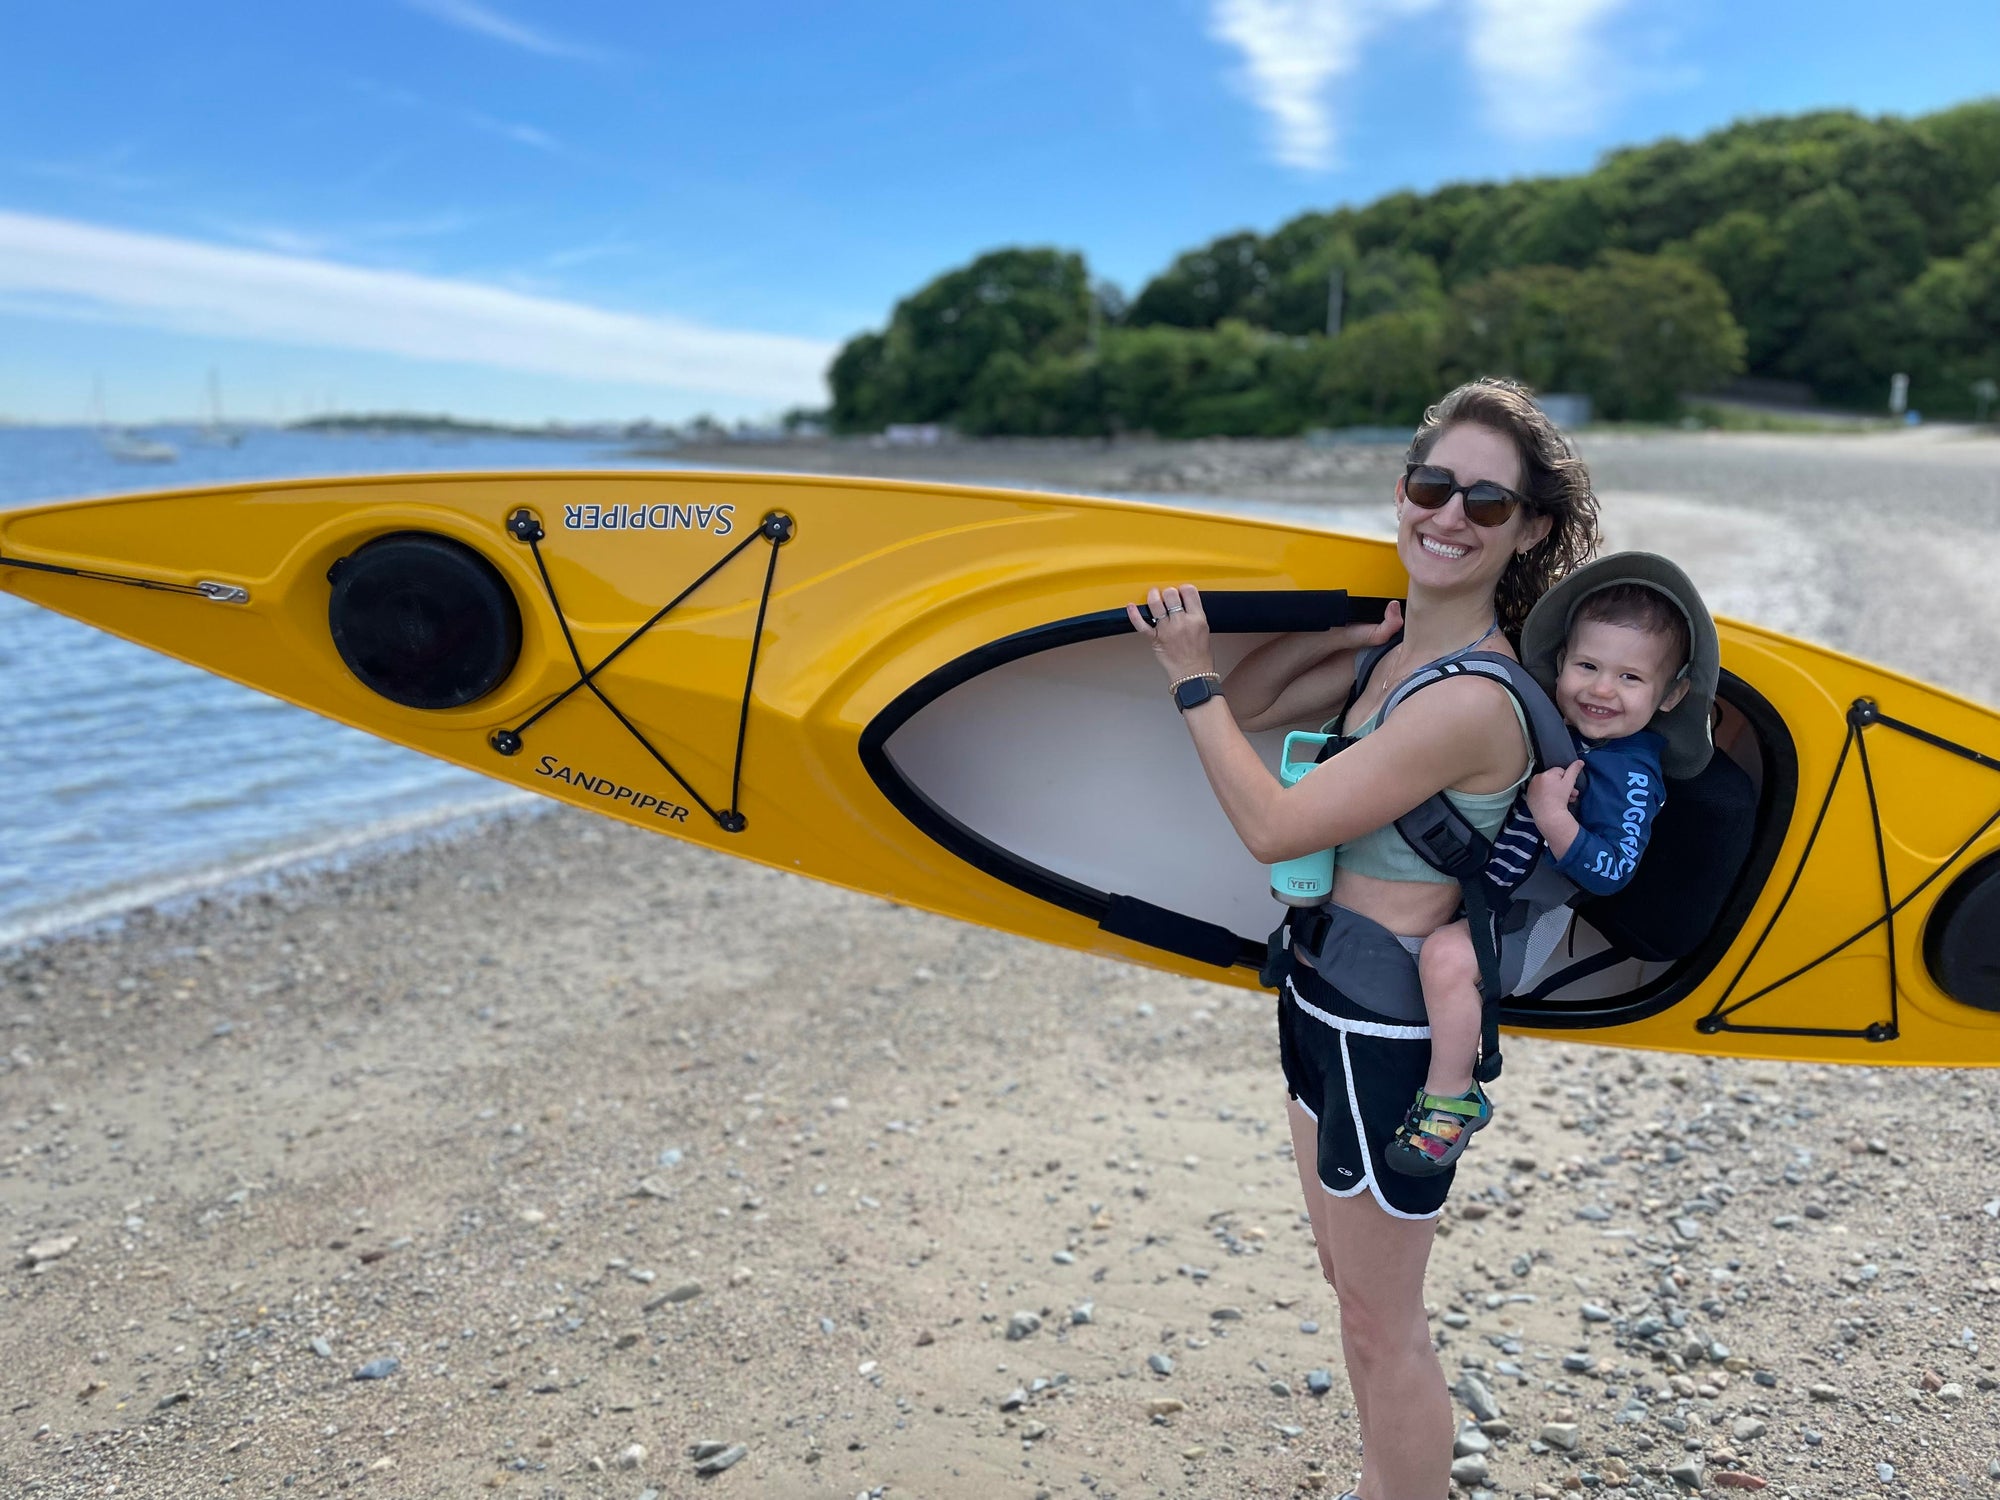 Personal Challenge: Paddling with Young Children